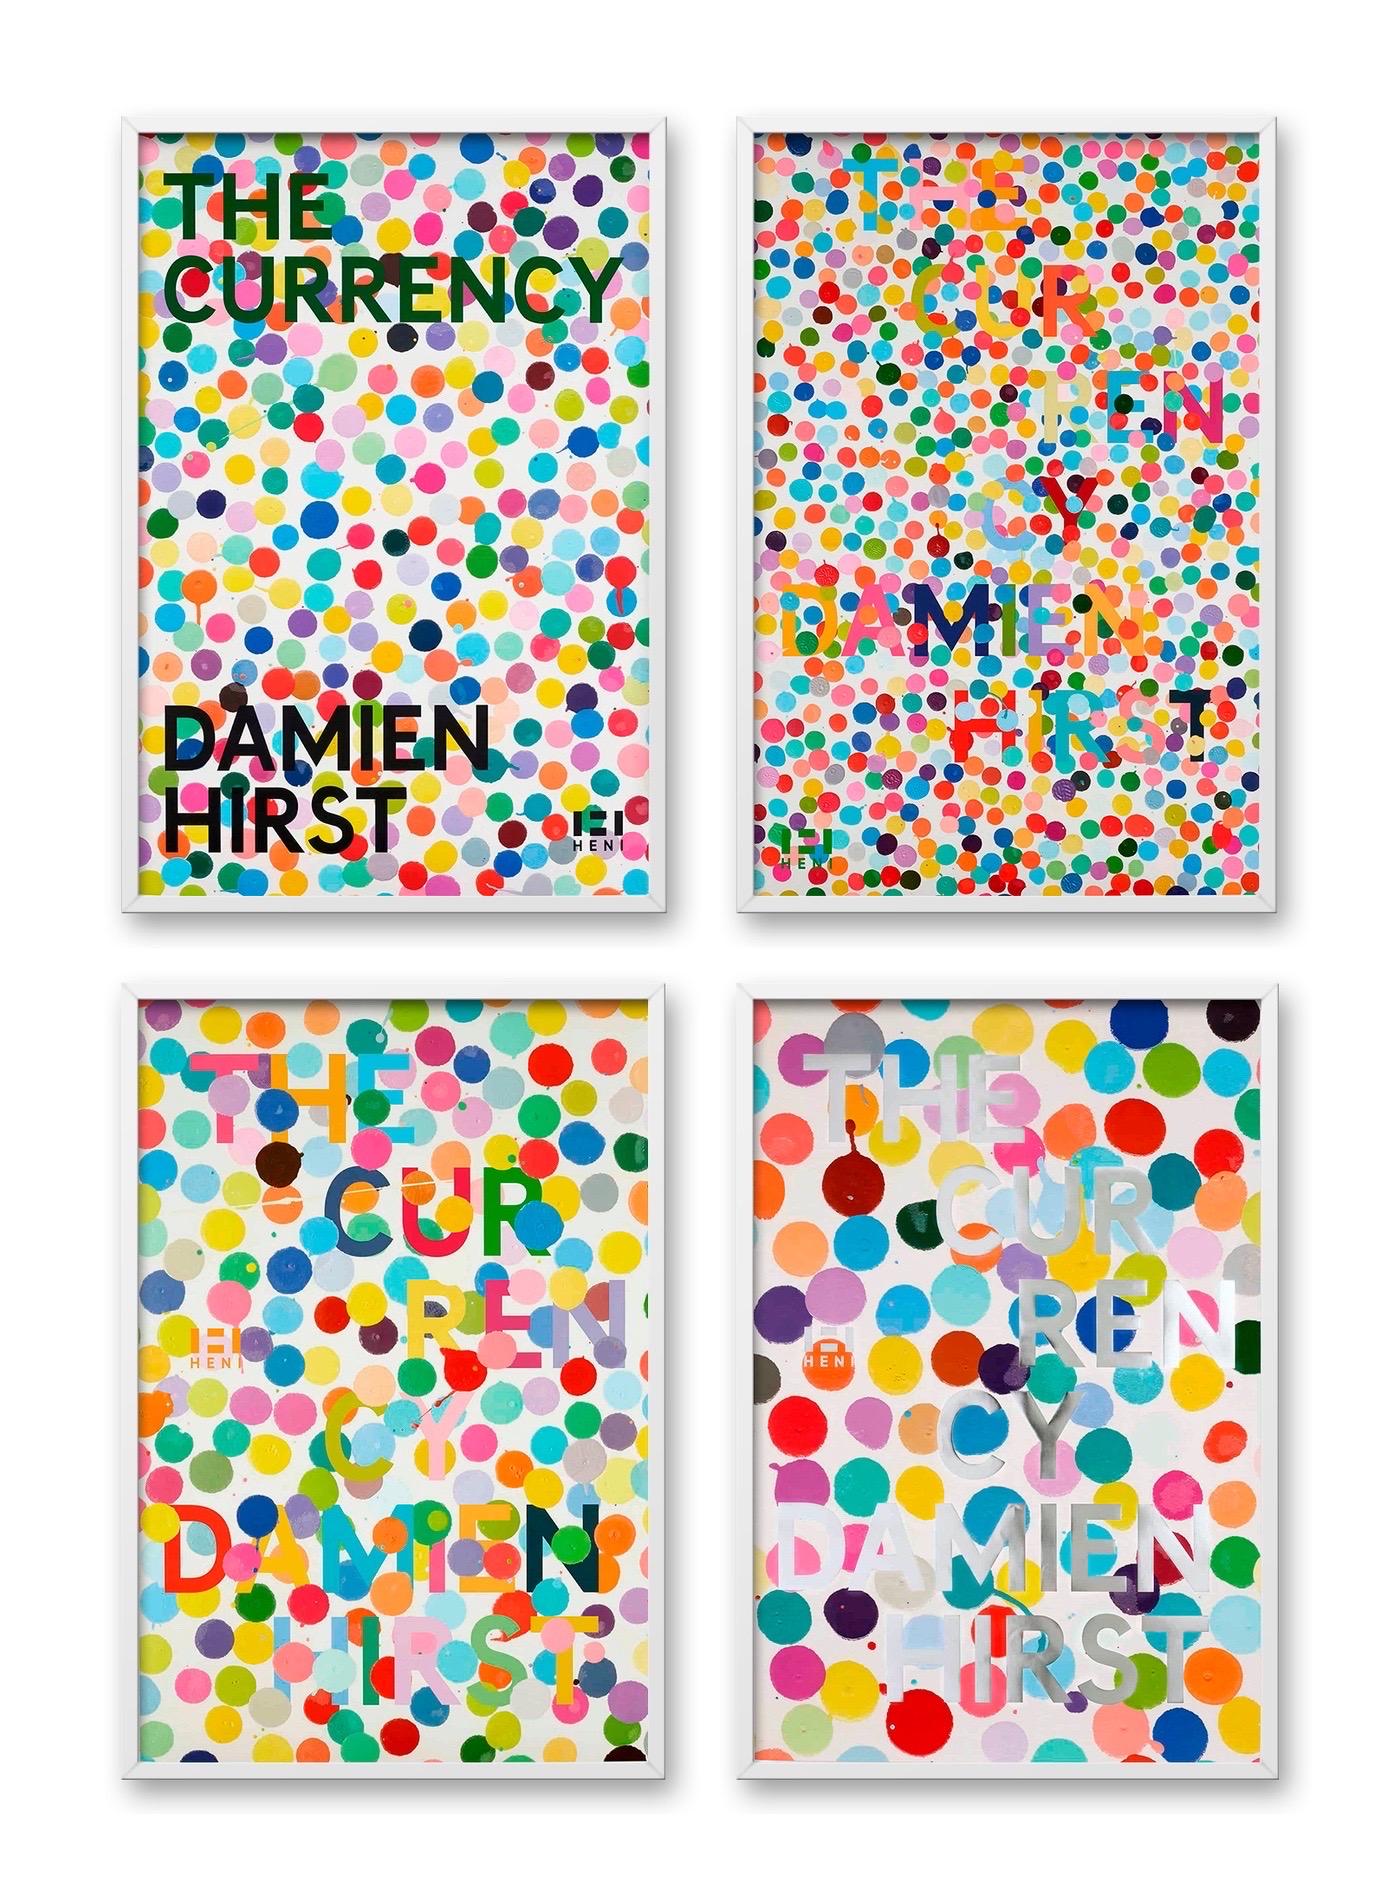 Damien Hirst, The Currency Posters (Set of 4) (Framed)

A set of four offset lithograph prints on thick semi-gloss paper in a white gallery box frame

Unframed: 59.4 x 88.9 cm (23 2/5 x 35 in)
Framed: 61.4 x 90.9 cm

Artworks are accompanied by a